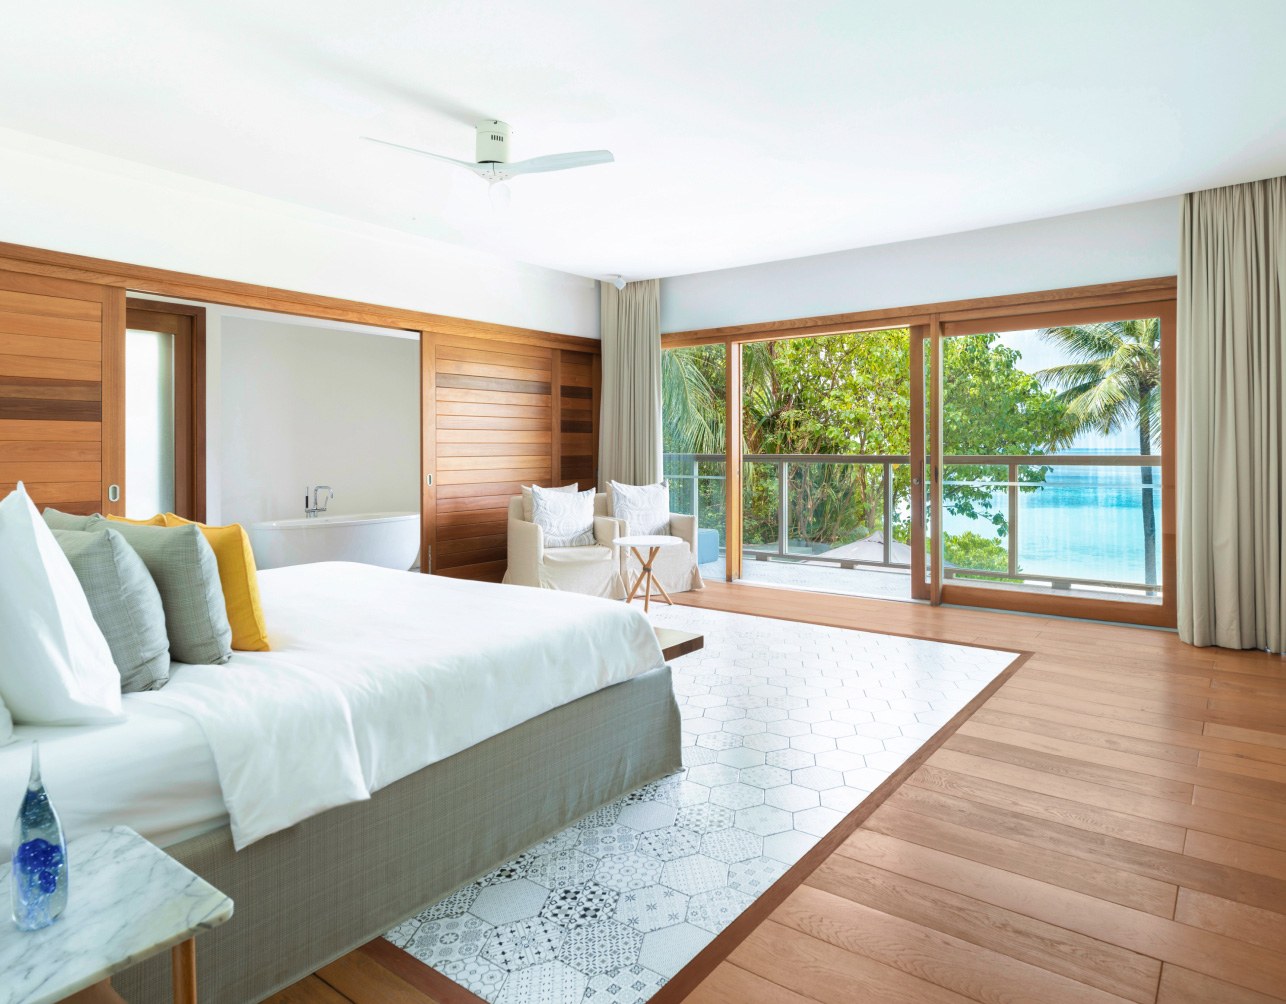 A suite with a king size bed, private balcony, & ensuite bathroom with a soaking tub in our 4 bedroom villa in the Maldives.